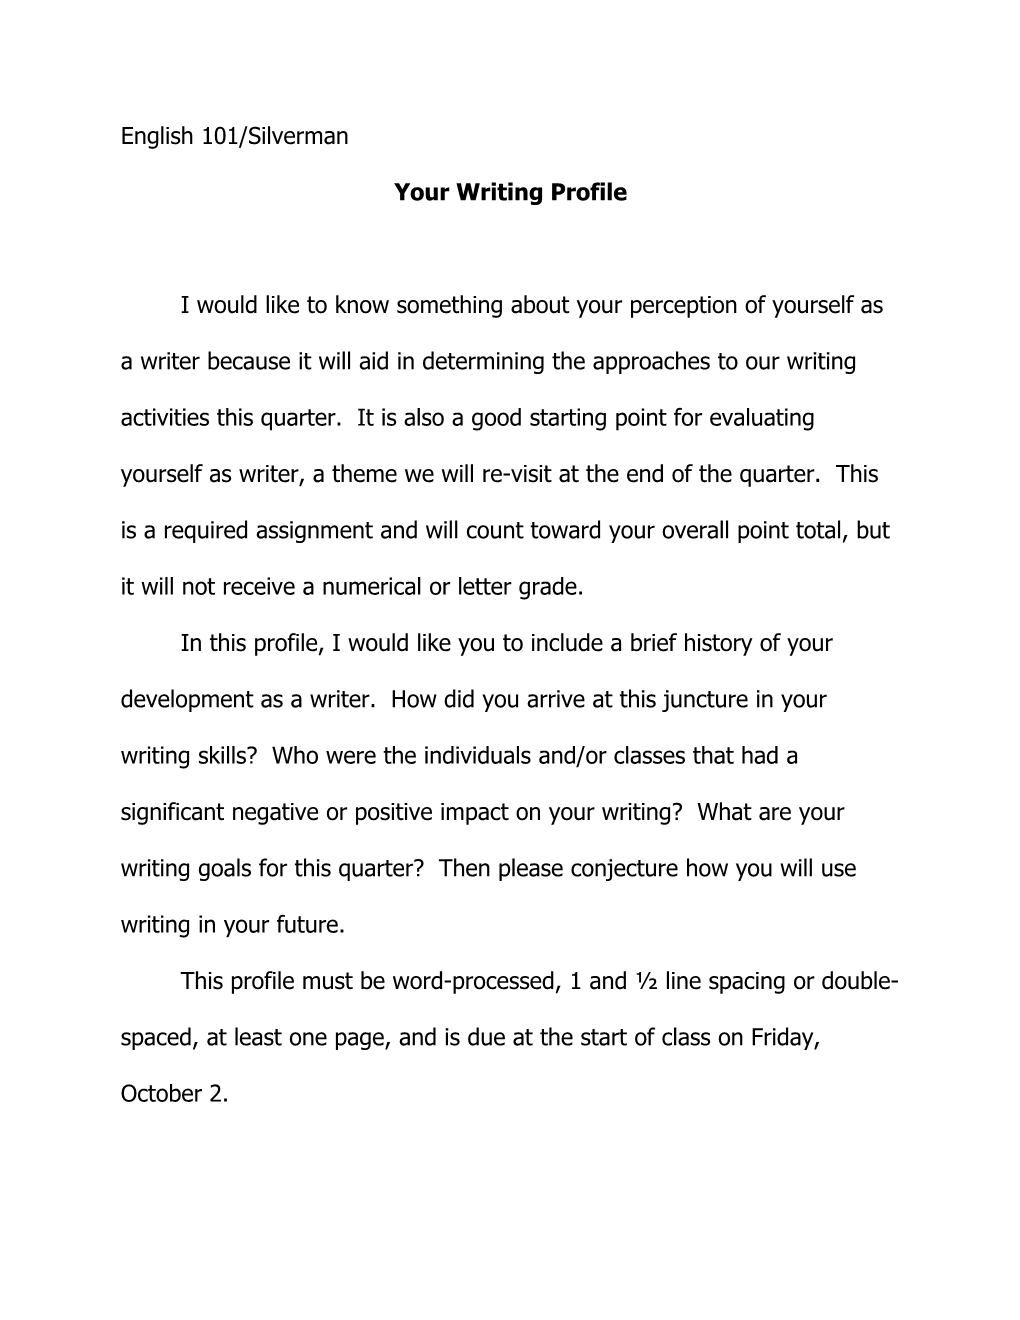 Your Writing Profile